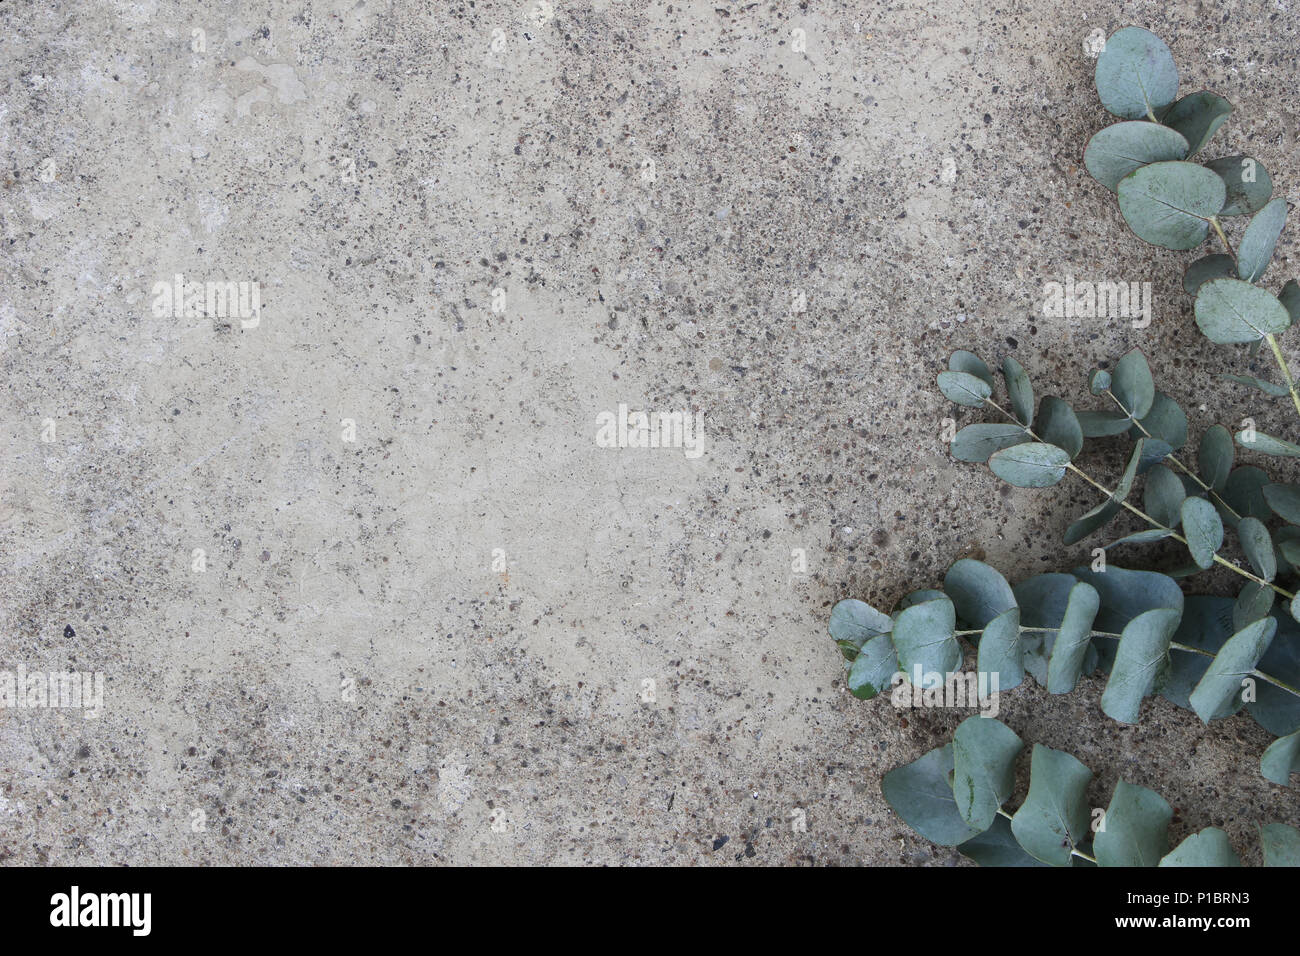 Feminine styled stock photo. Floral composition of Green silver dollar eucalyptus leaves and branches. Grunge concrete background. Flat lay, top view. Empty space. Stock Photo